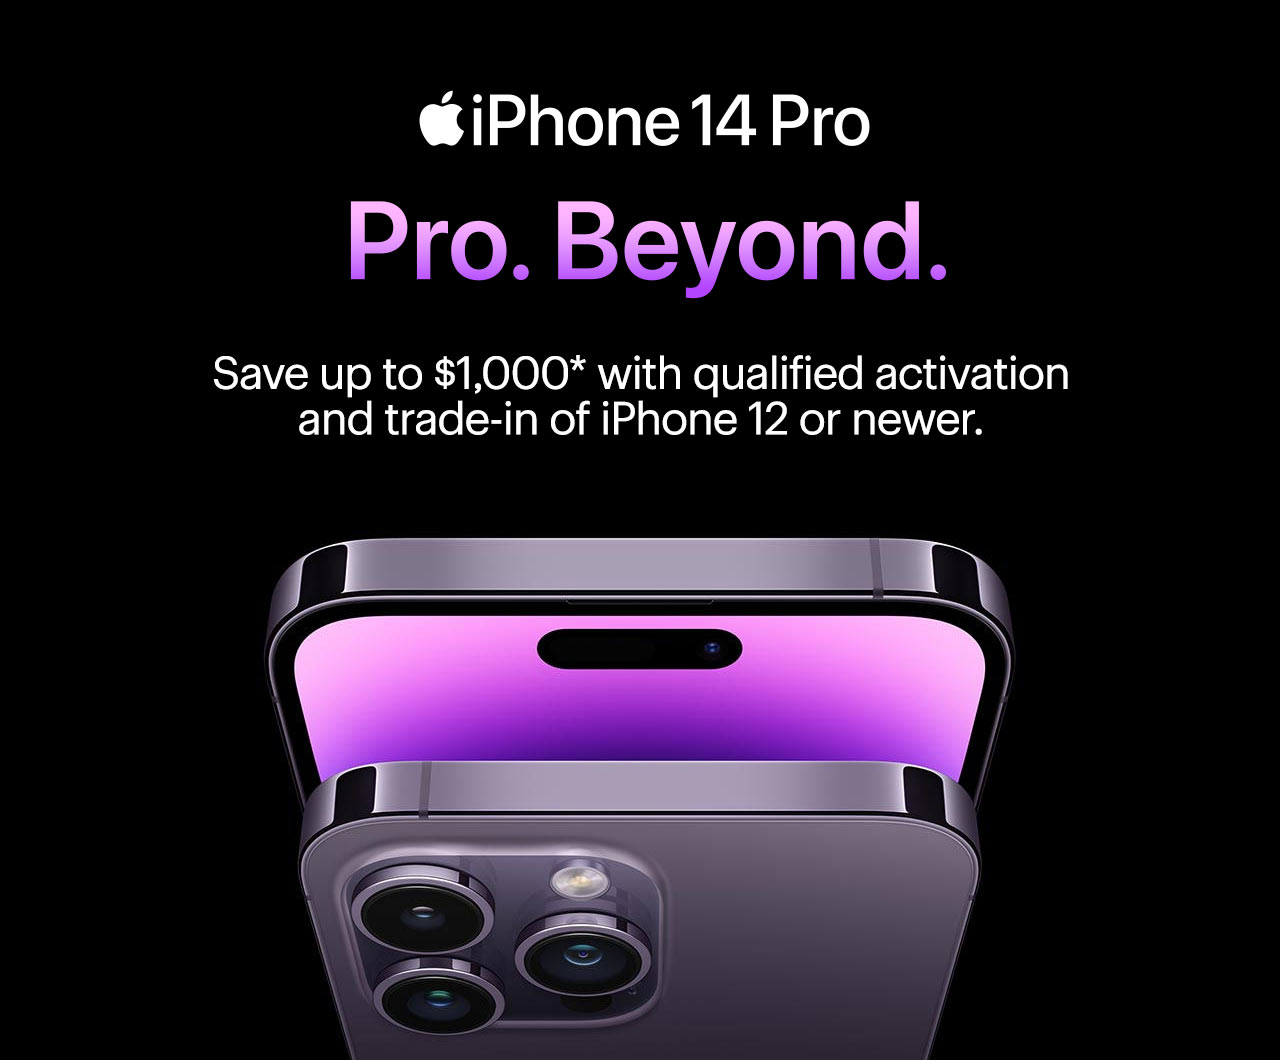 iPhone 14 Pro. Pro. Beyond. Save up to $1,000 with qualified activation and trade-in of iPhone 12 or newer. Reference disclaimer.